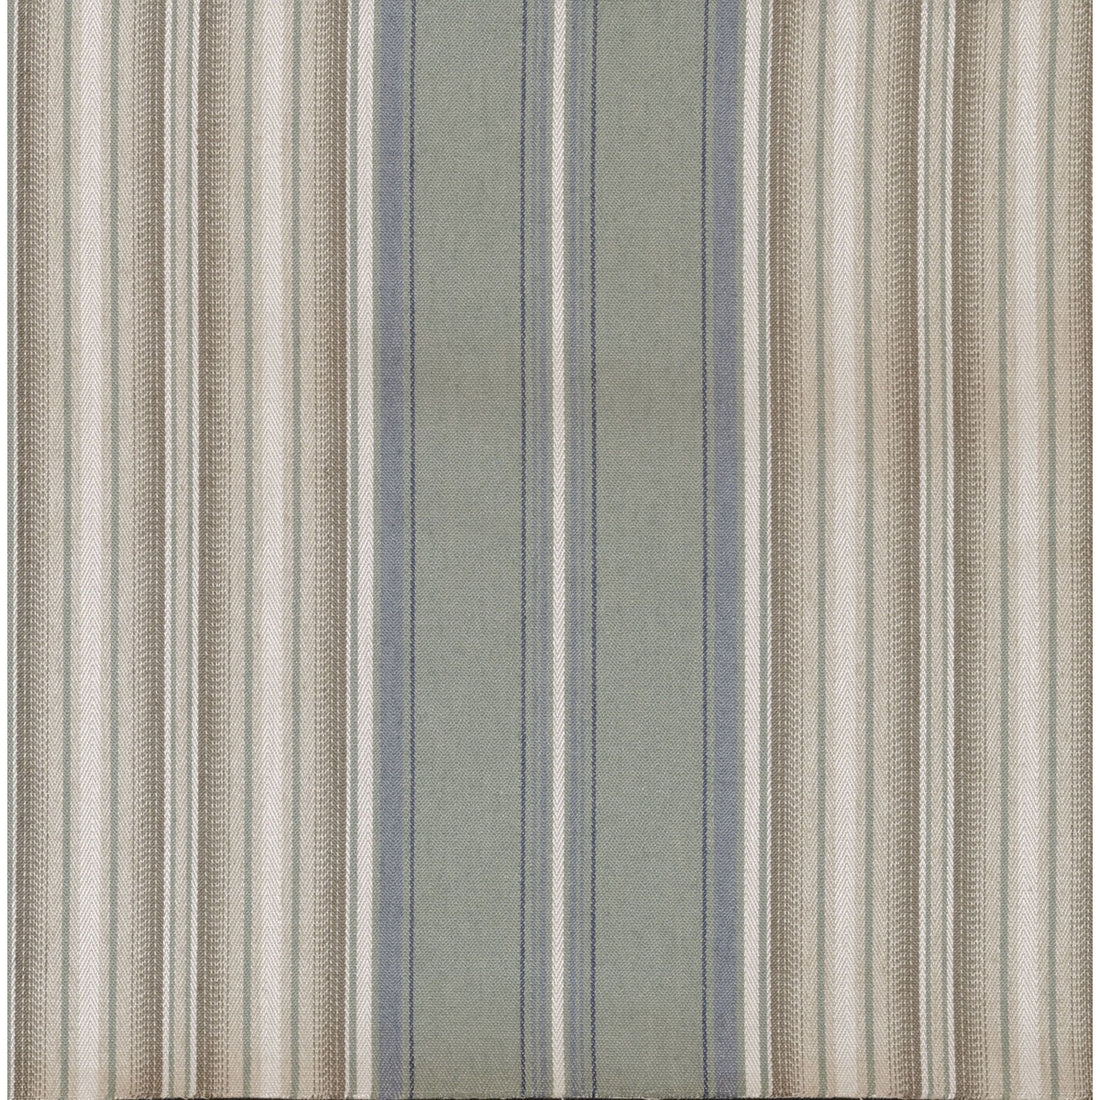 Windsor Stripe fabric in aqua/blue color - pattern BFC-3659.135.0 - by Lee Jofa in the Blithfield collection